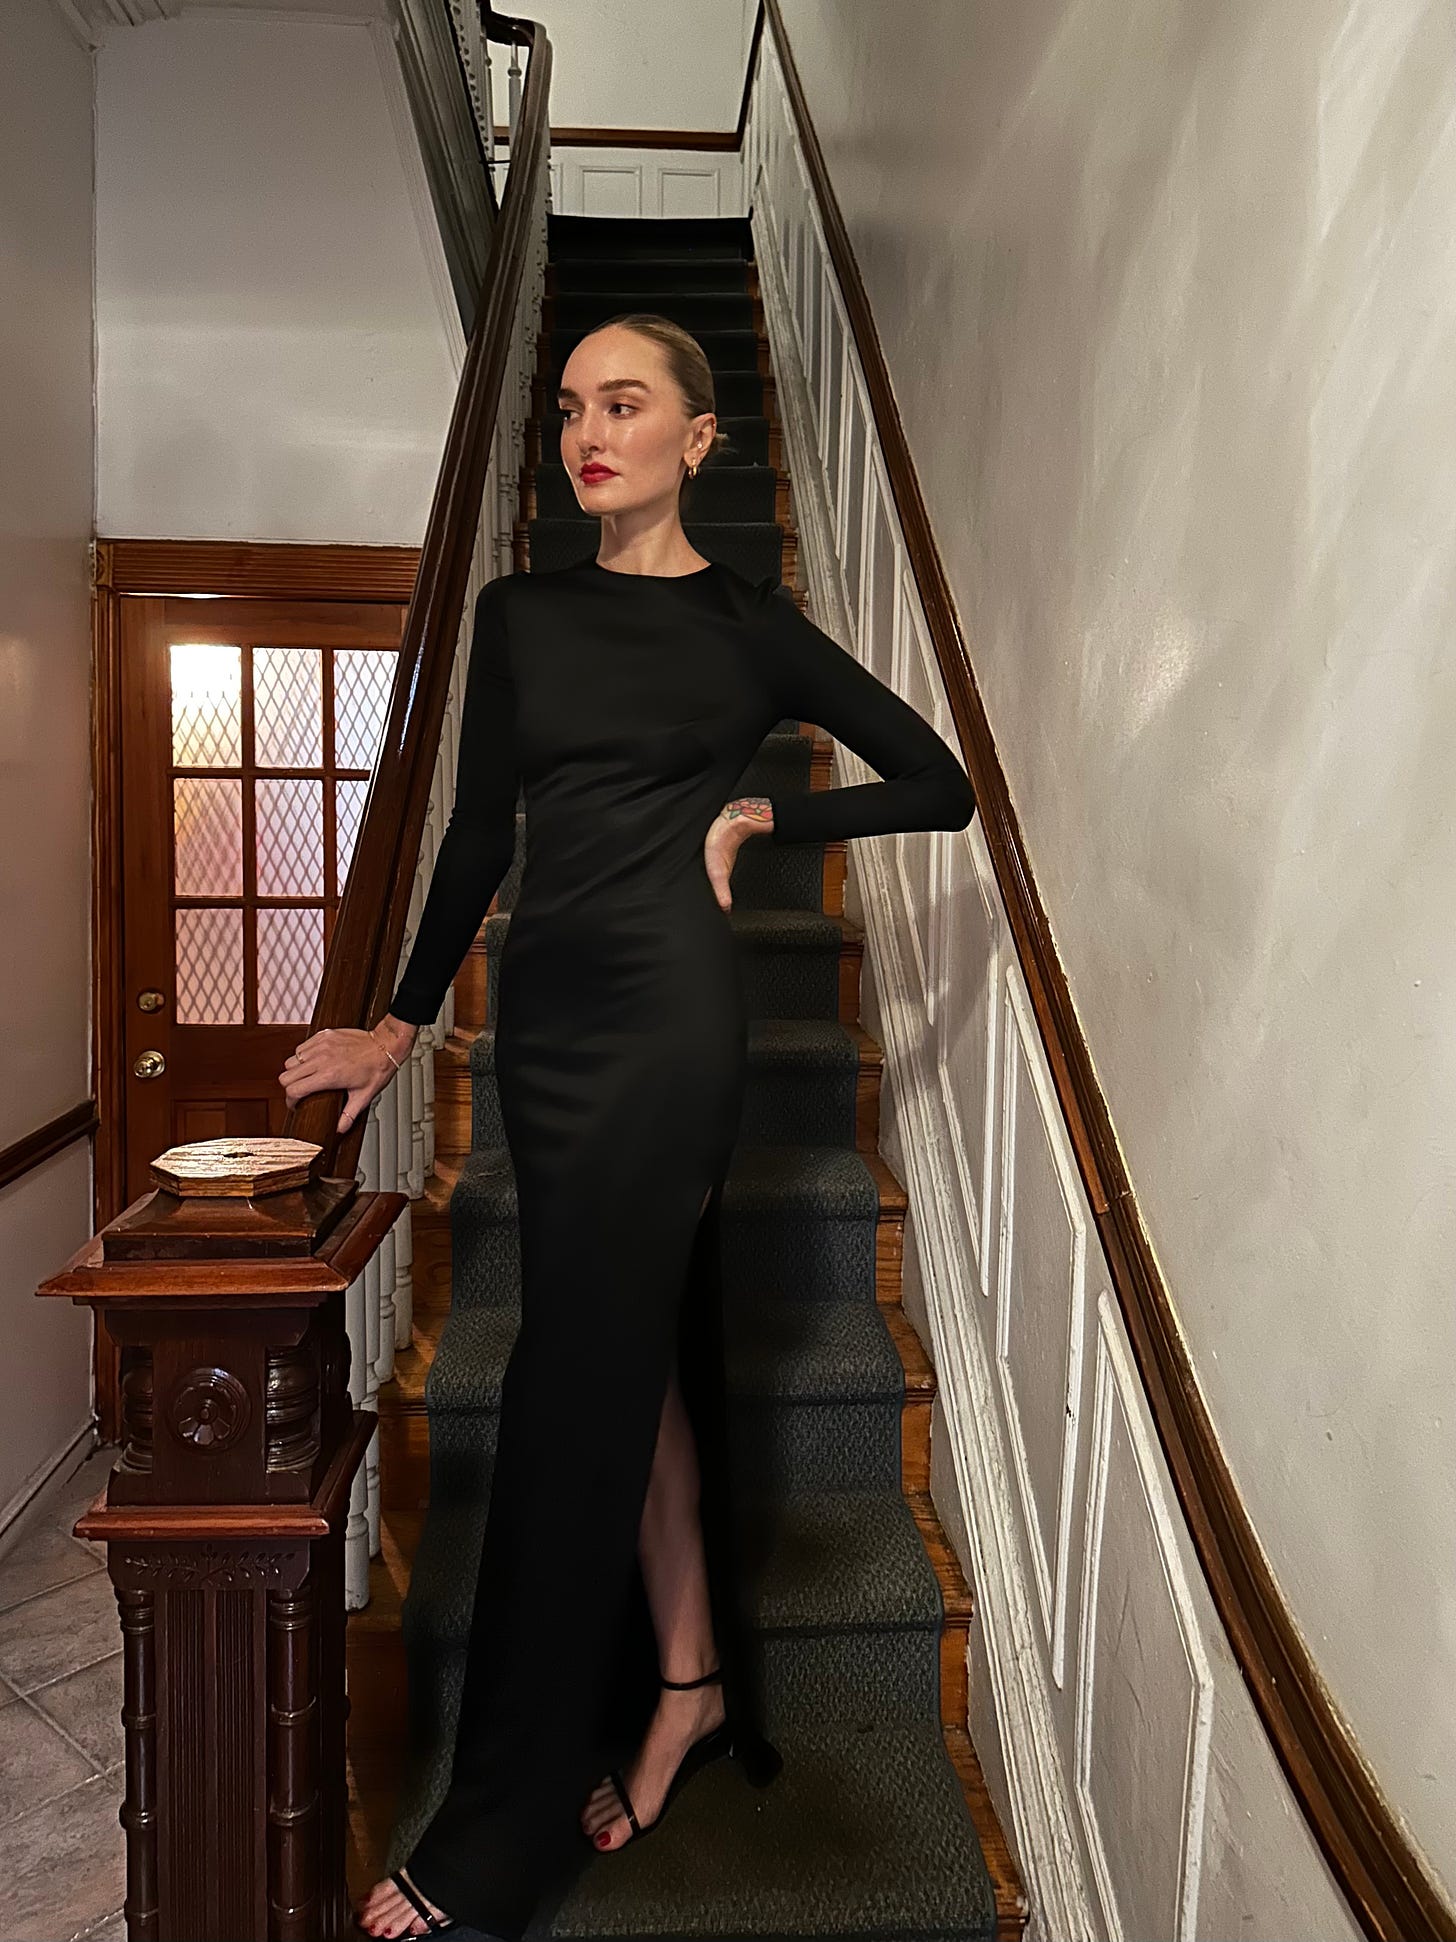 A woman in a long black dress on a staircase